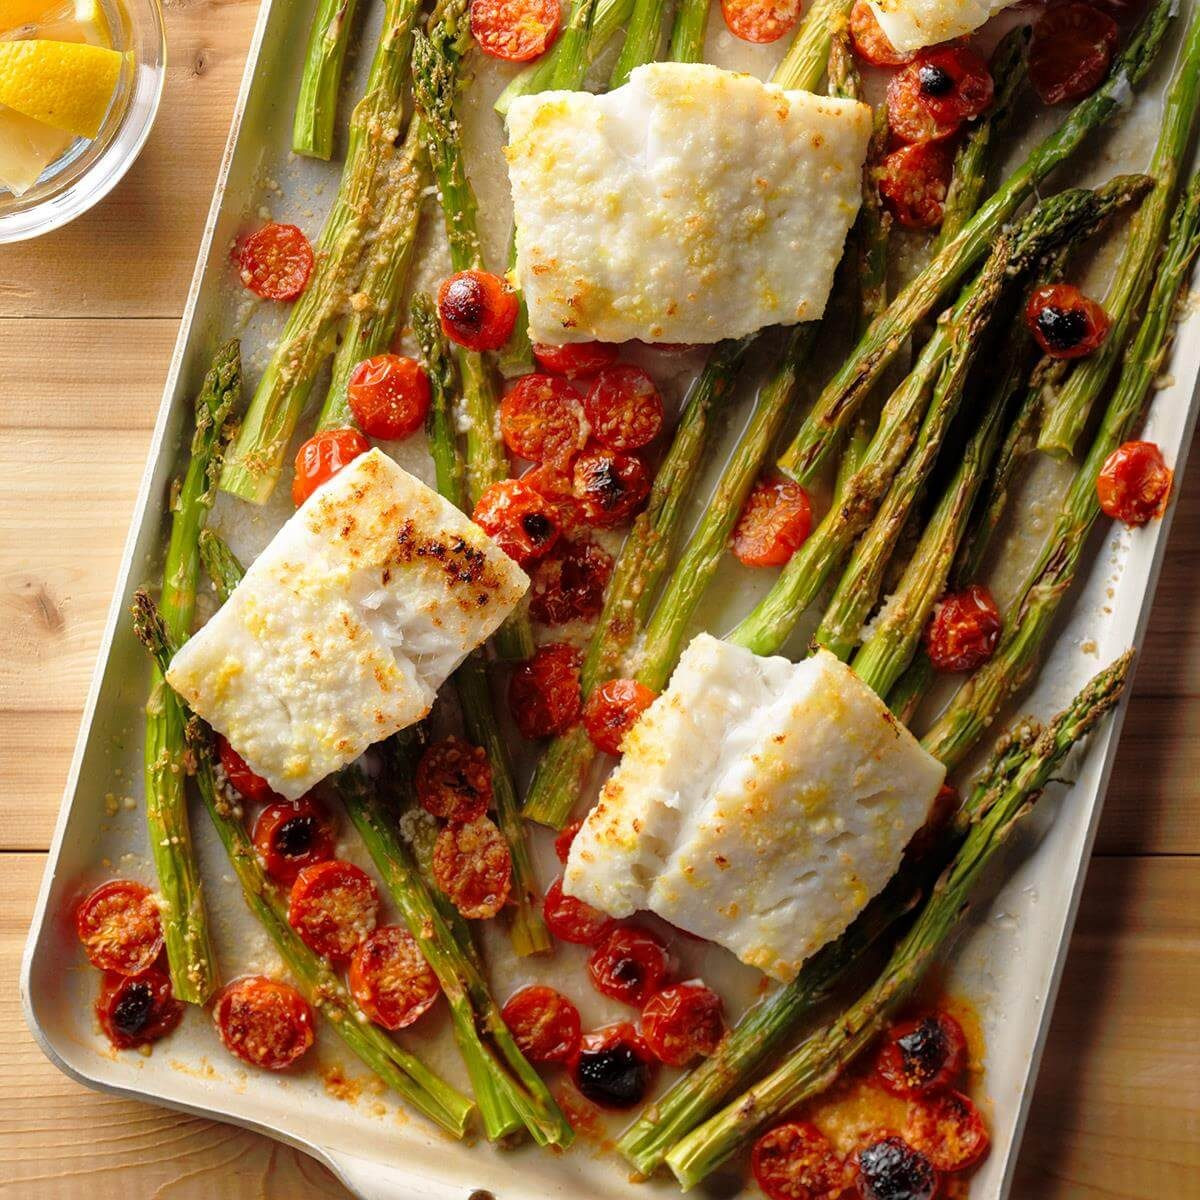 Seafood Dinner Recipes
 50 of Our Best Seafood Recipes for Dinner